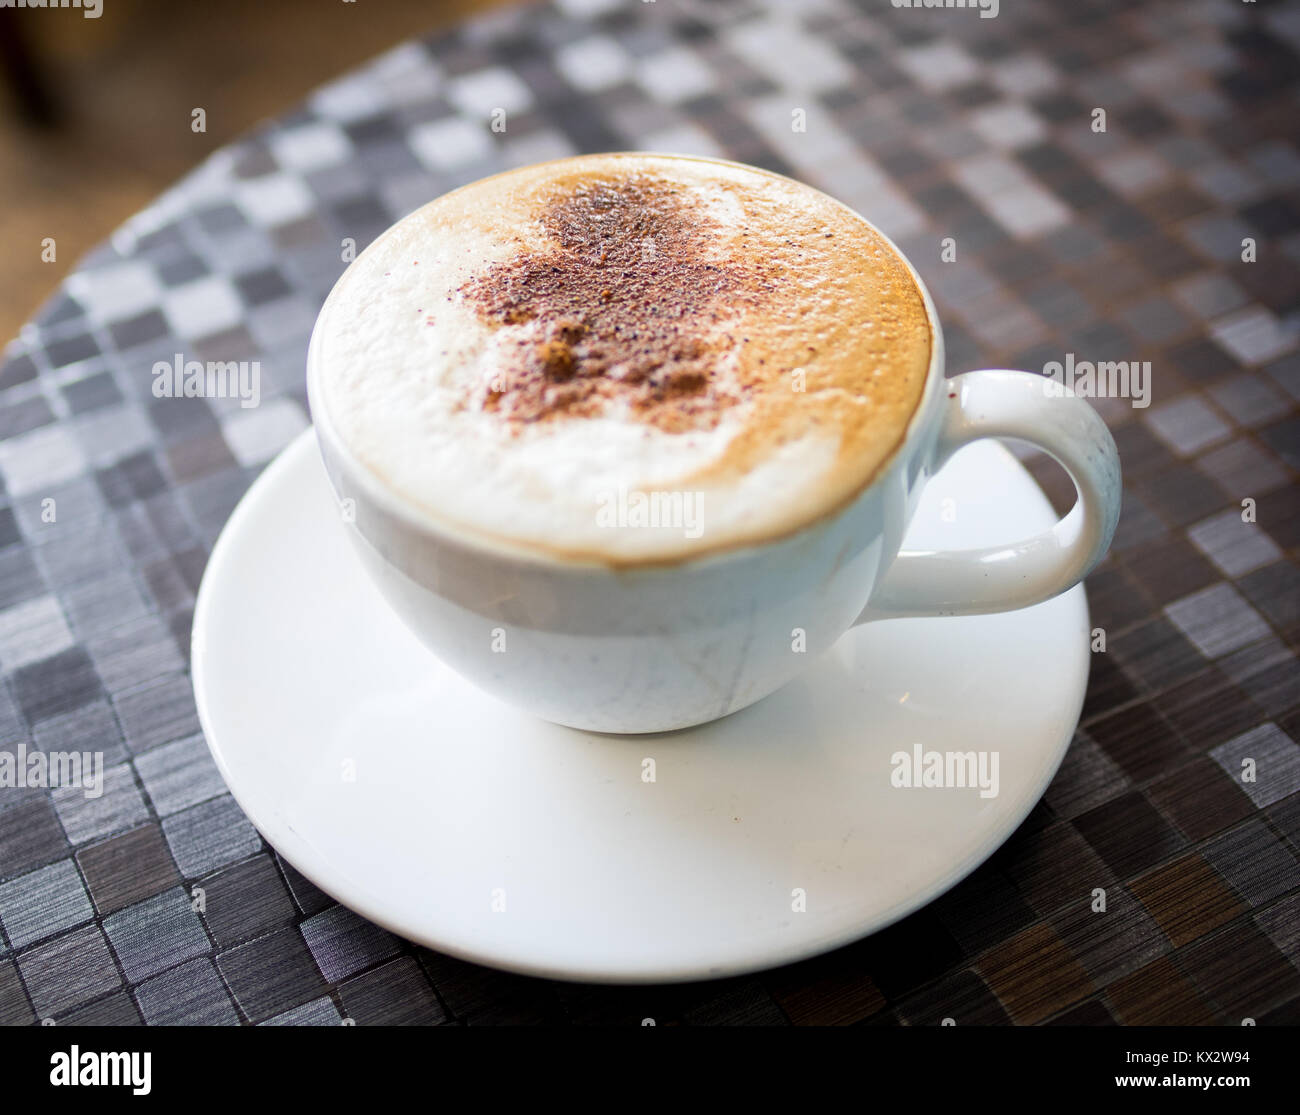 A gingerbread latte from d'Lish by Tish Cafe in Saskatoon, Saskatchewan, Canada. Stock Photo